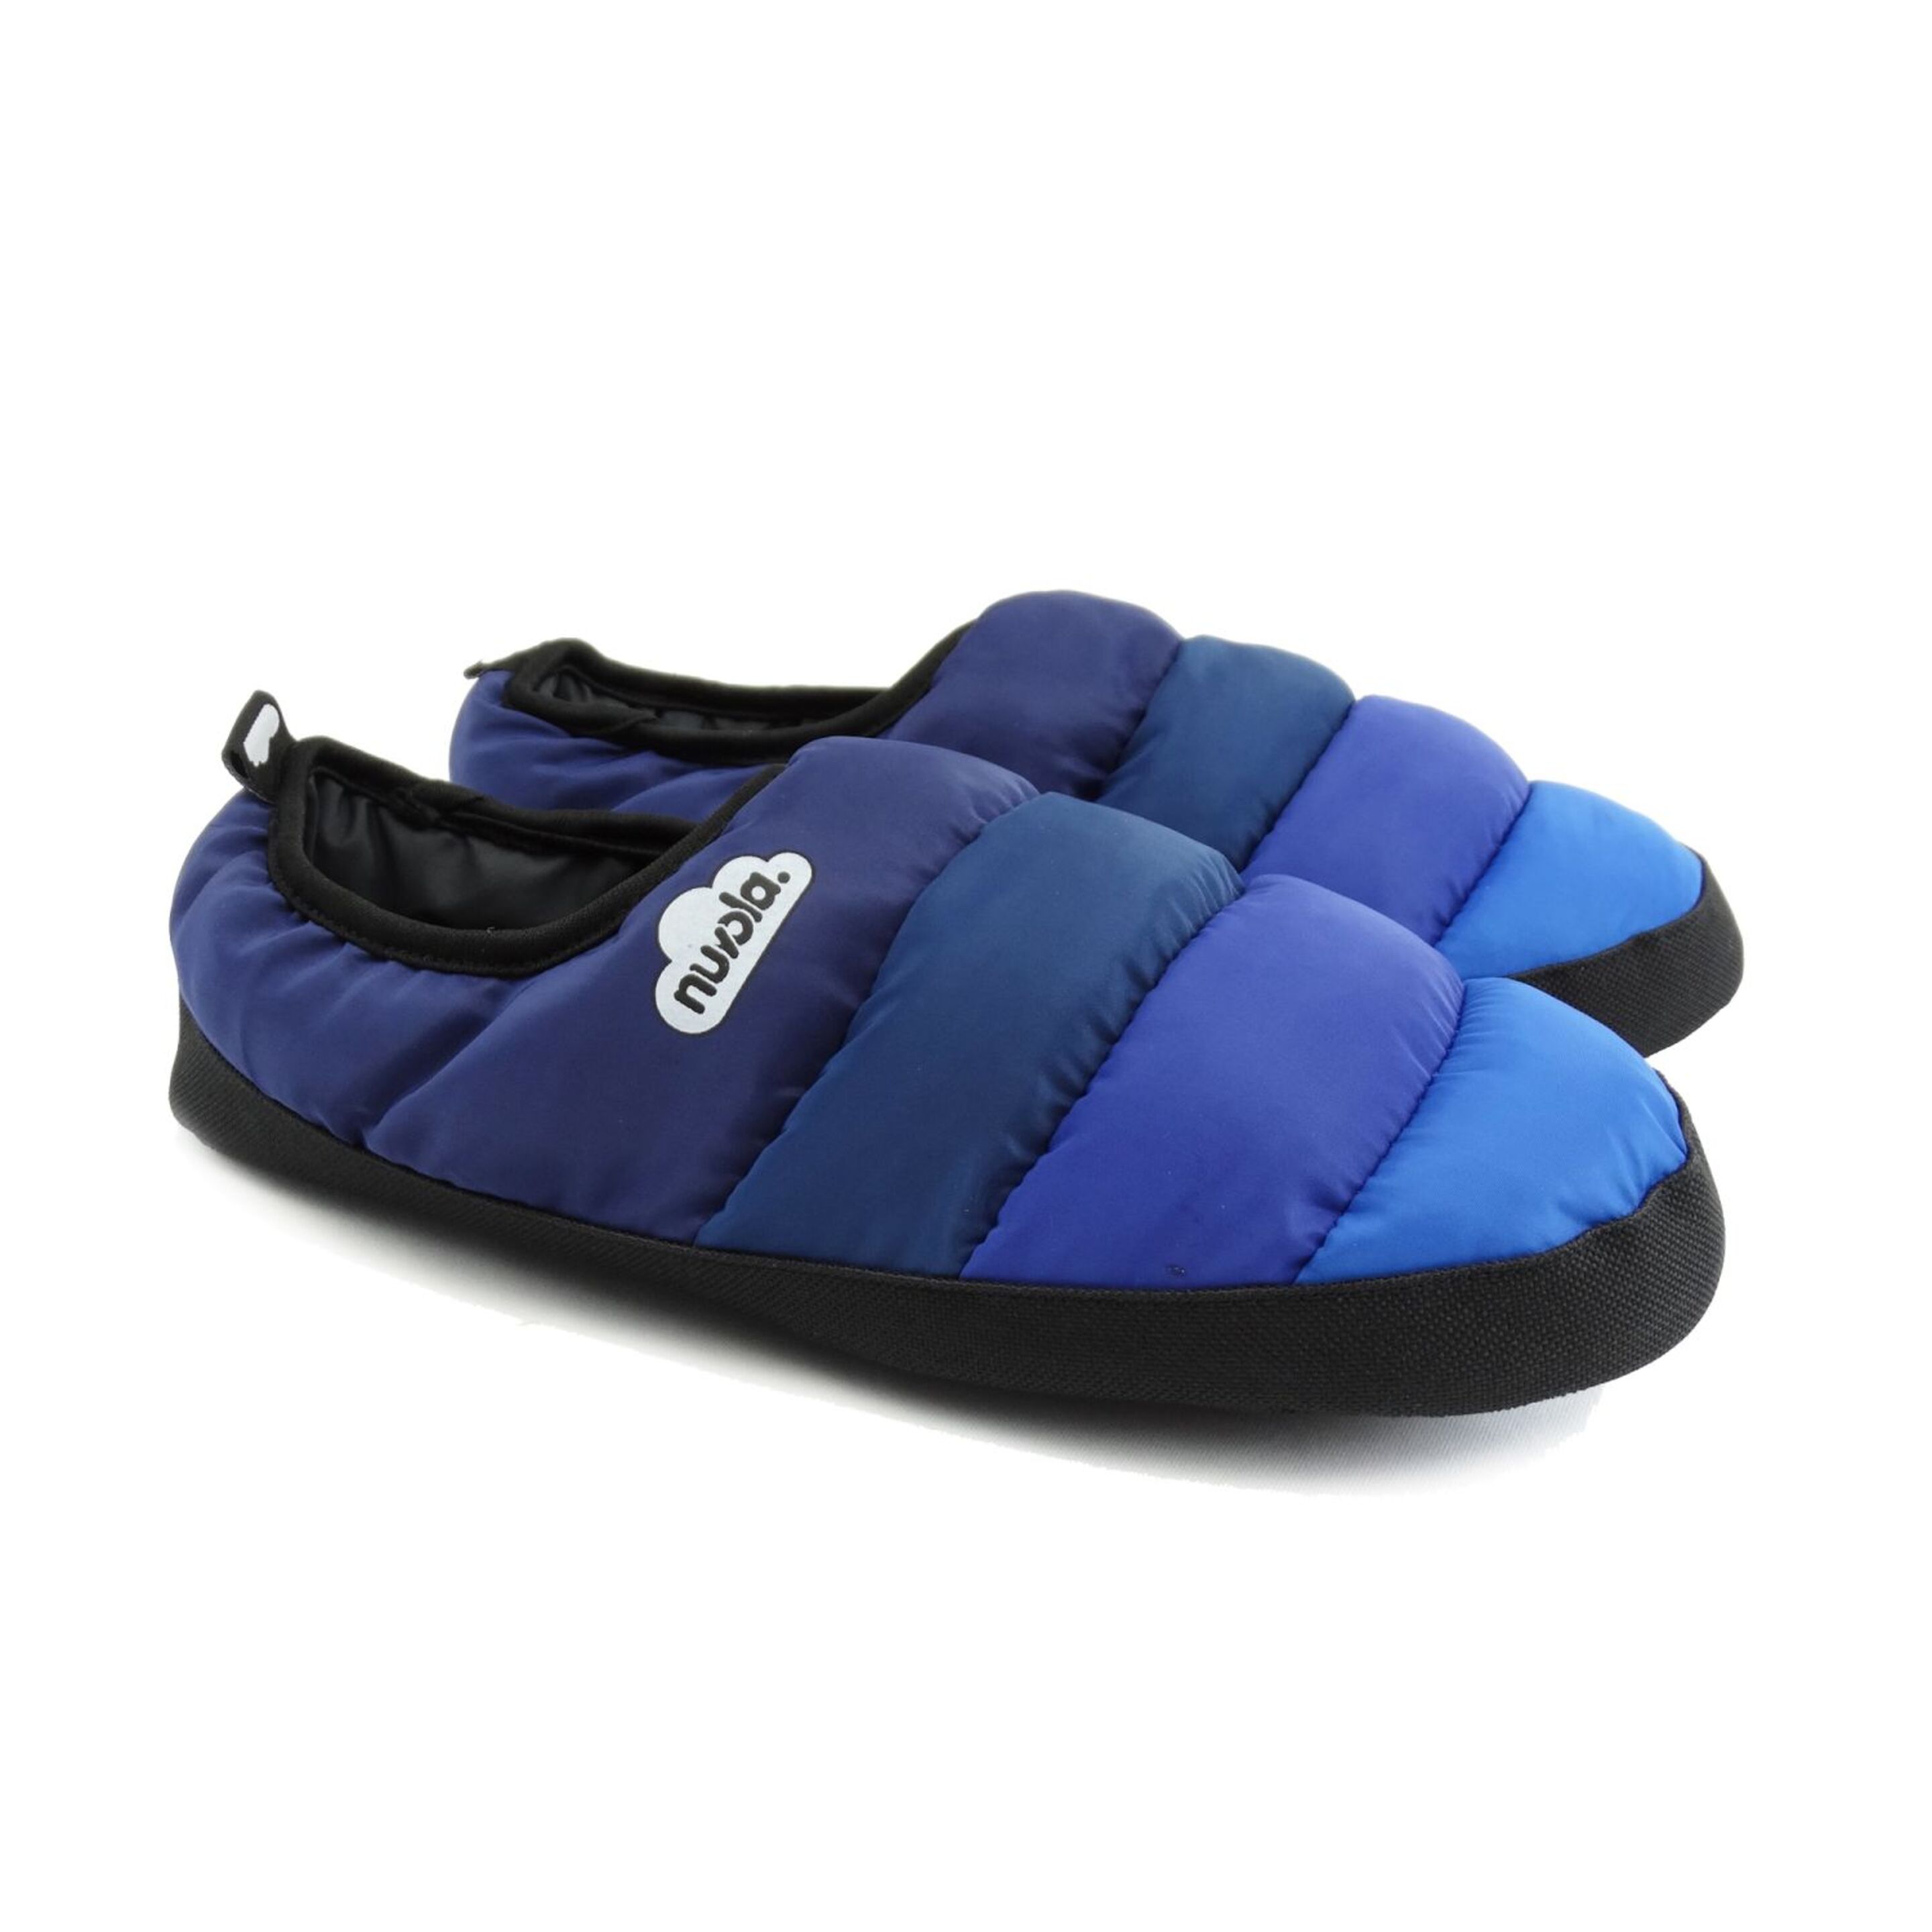 Slippers Camping NuvolaÂ®,clasica Colors